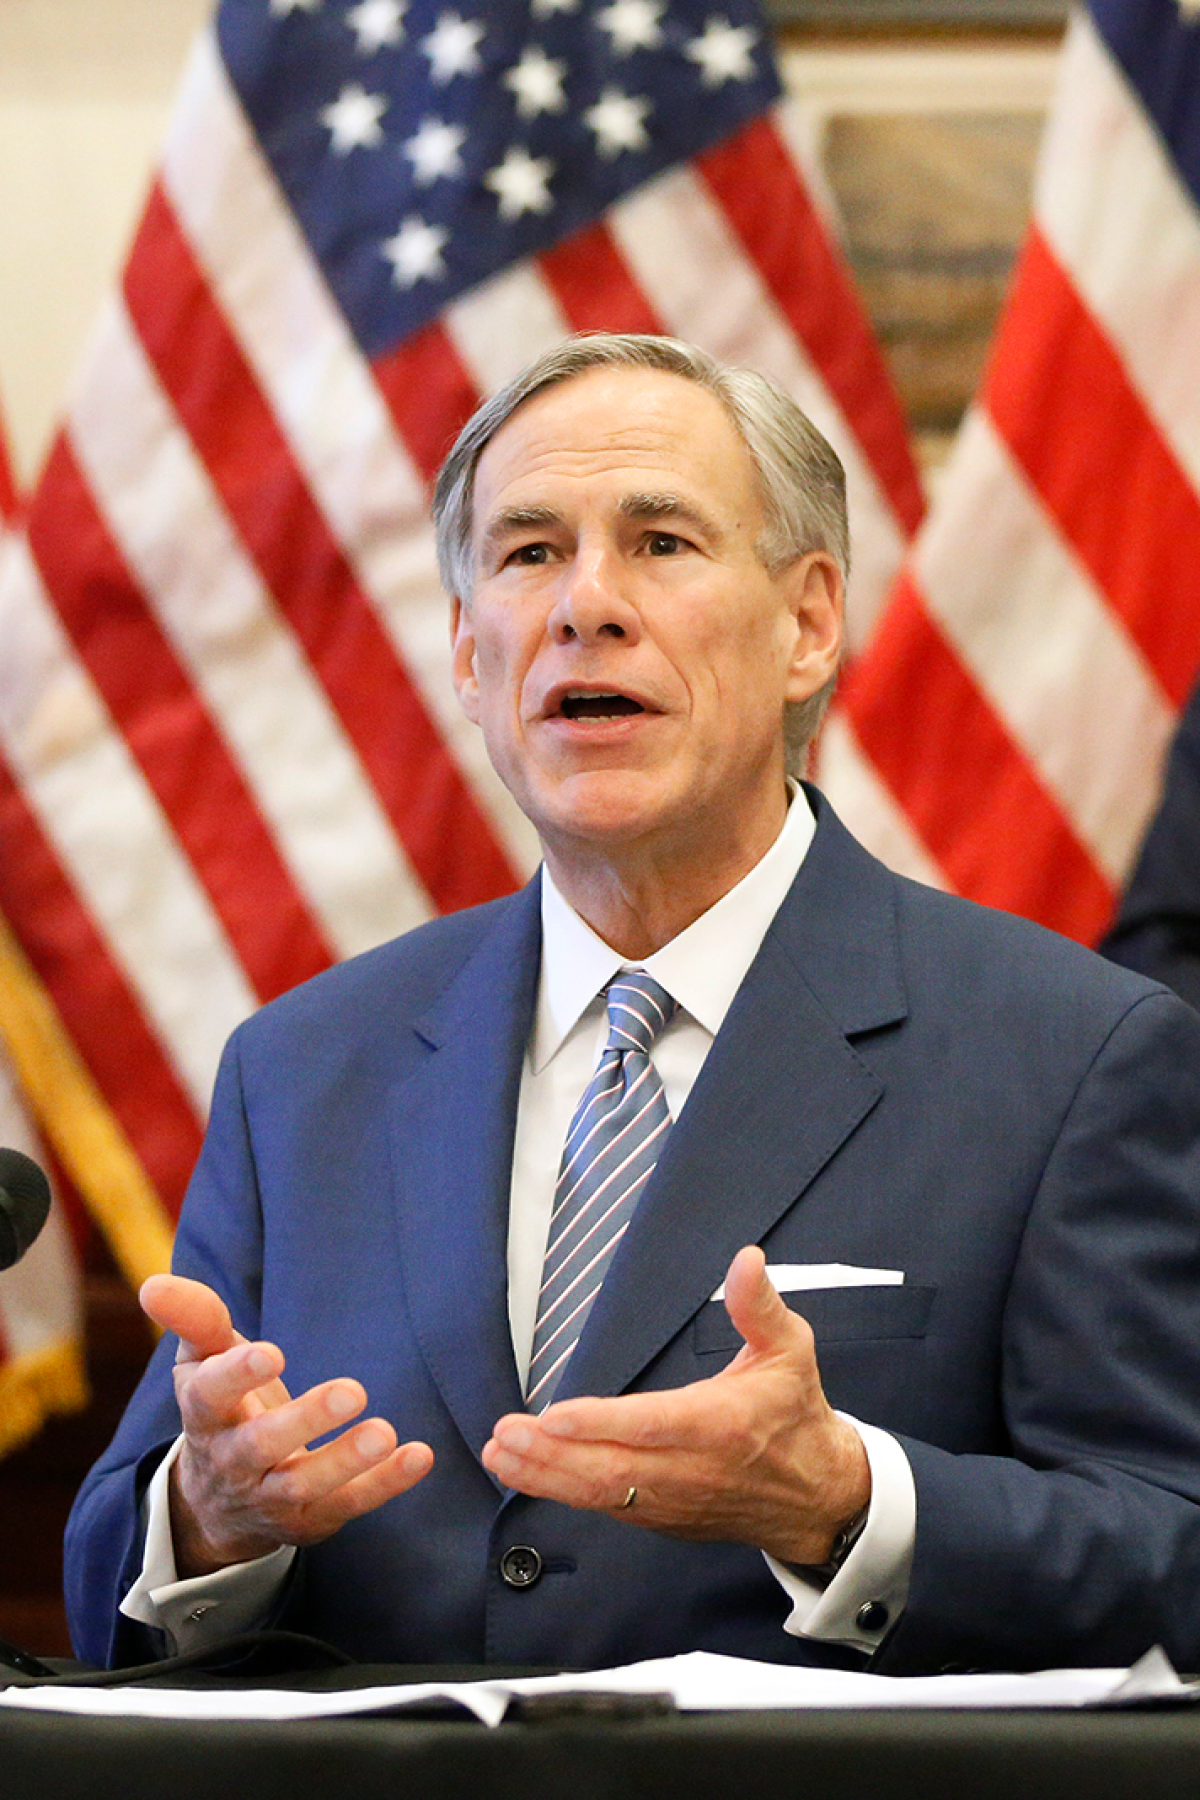 Texas Governor Greg Abbott announced the US Army Corps of Engineers and the state are putting up a 250-bed field hospital at the Kay Bailey Hutchison Convention Center in downtown Dallas during a press conference at the Texas State Capitol in Austin, Sunday, March 29, 2020. Photo by Tom Fox-Pool/Getty Images